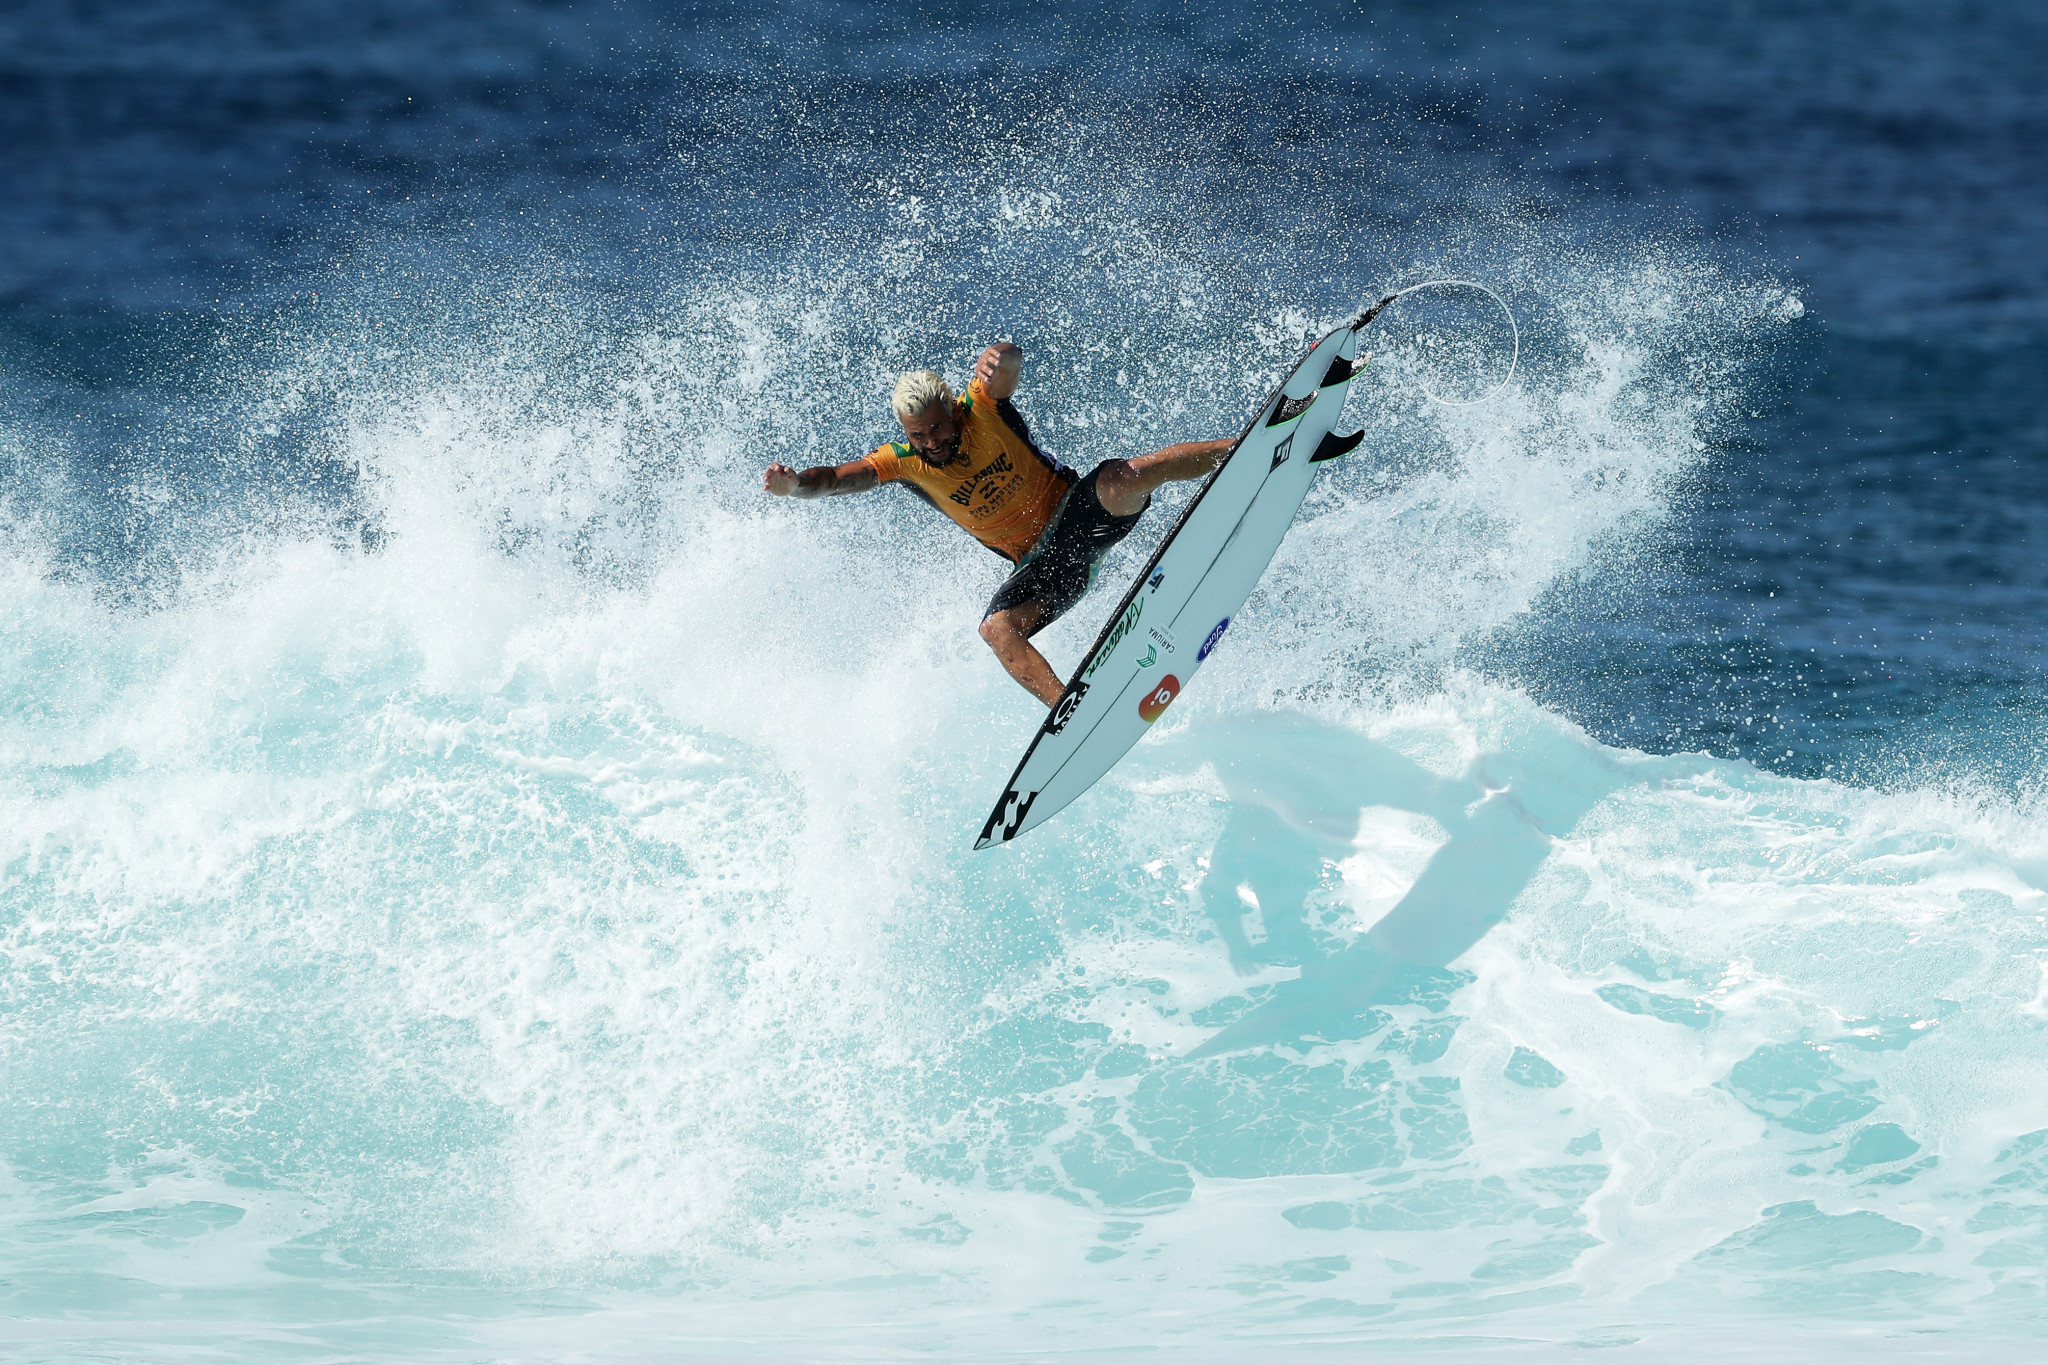 Ferreira clinches World Surf League crown but Olympic hopes of legend Slater dashed